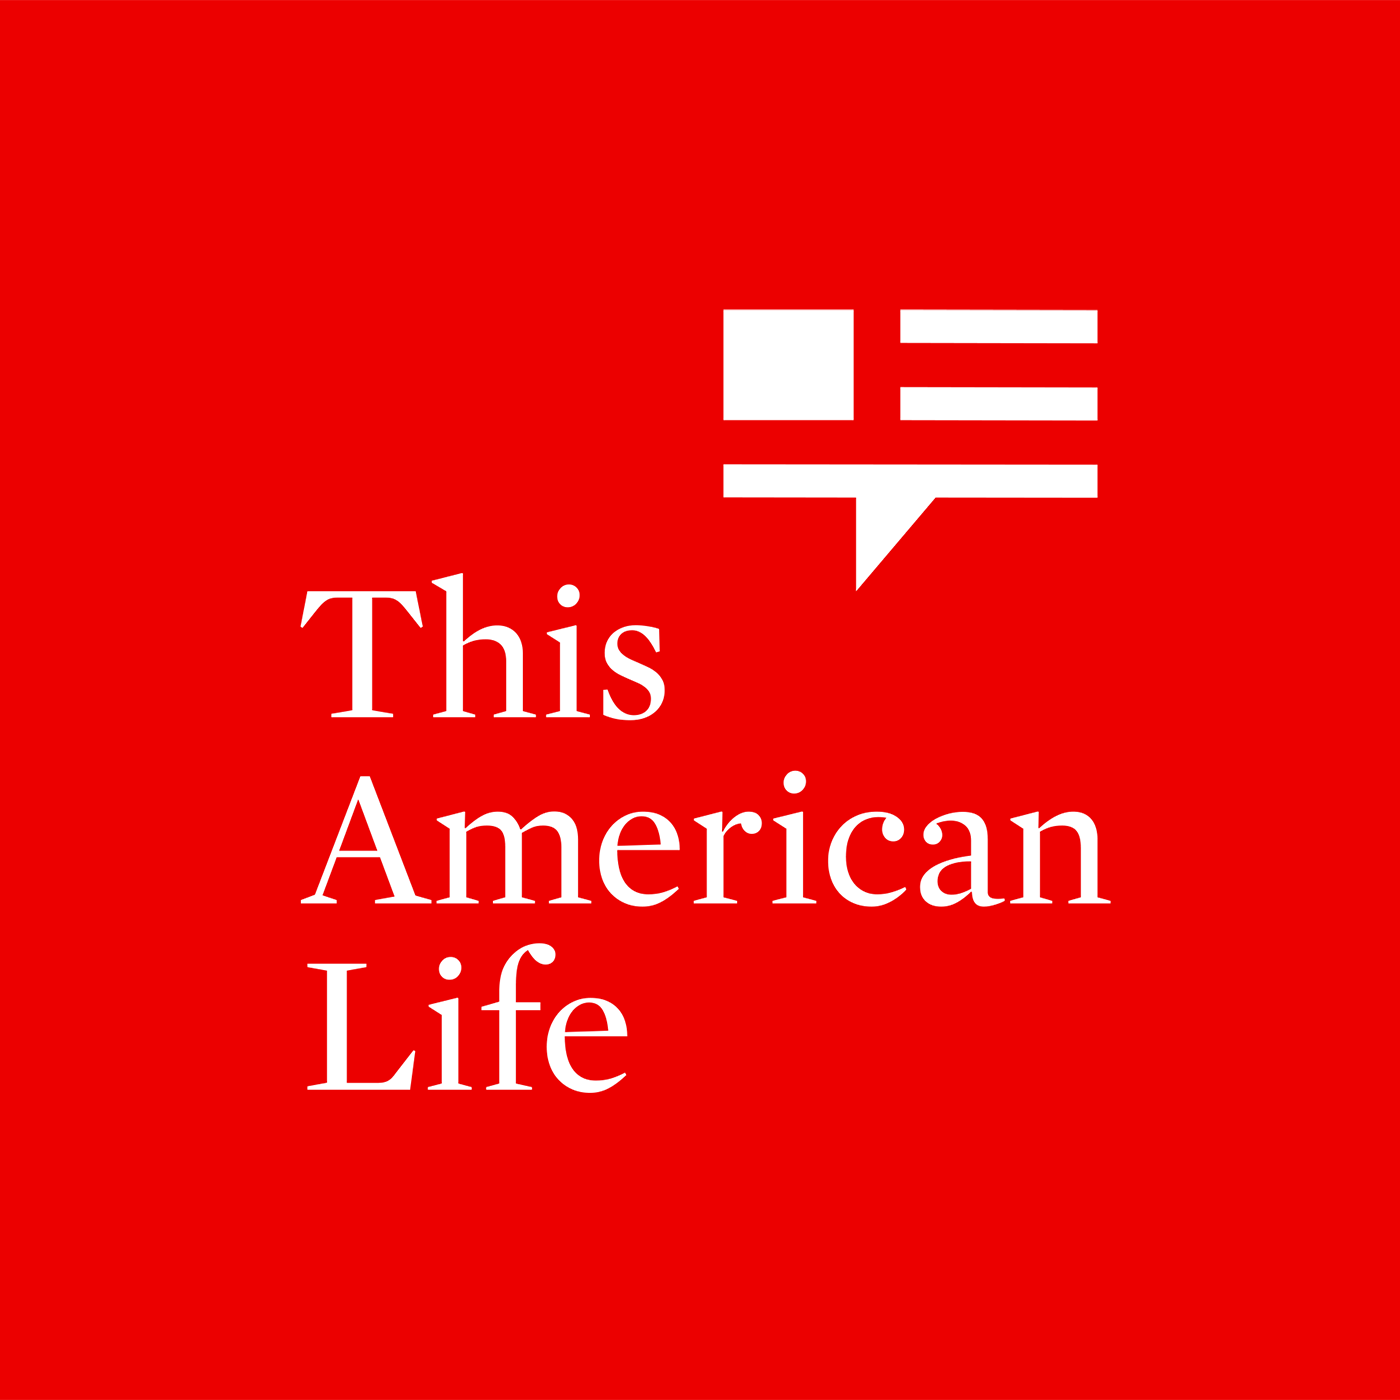 Advertise on “This American Life”